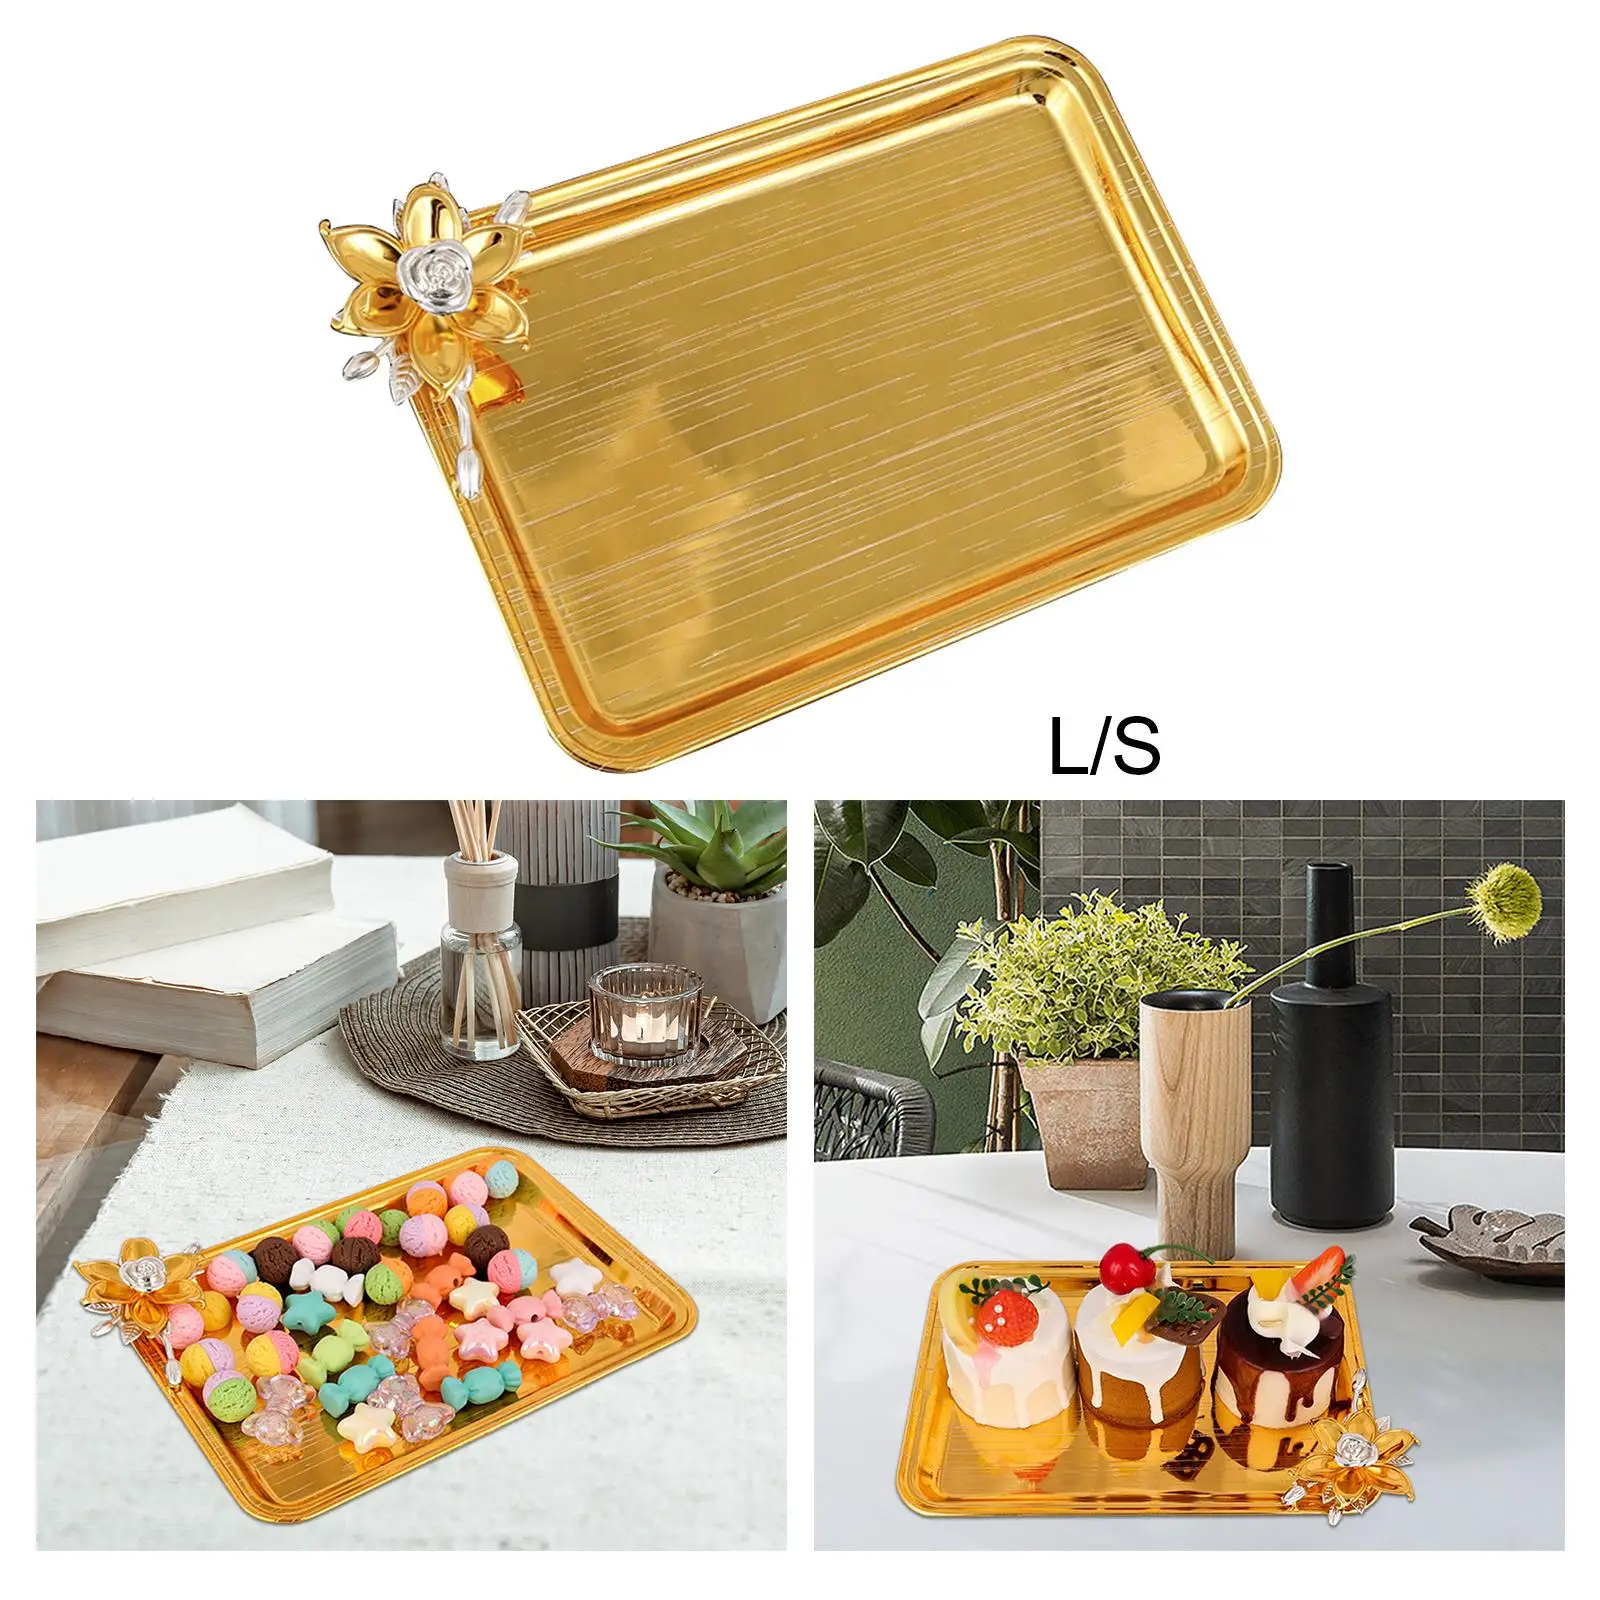 Snack Tray Photo Props Lightweight Durable Multifunctional Decorative Tray Metal Tray for Countertop Party Desk Kitchen Beverage